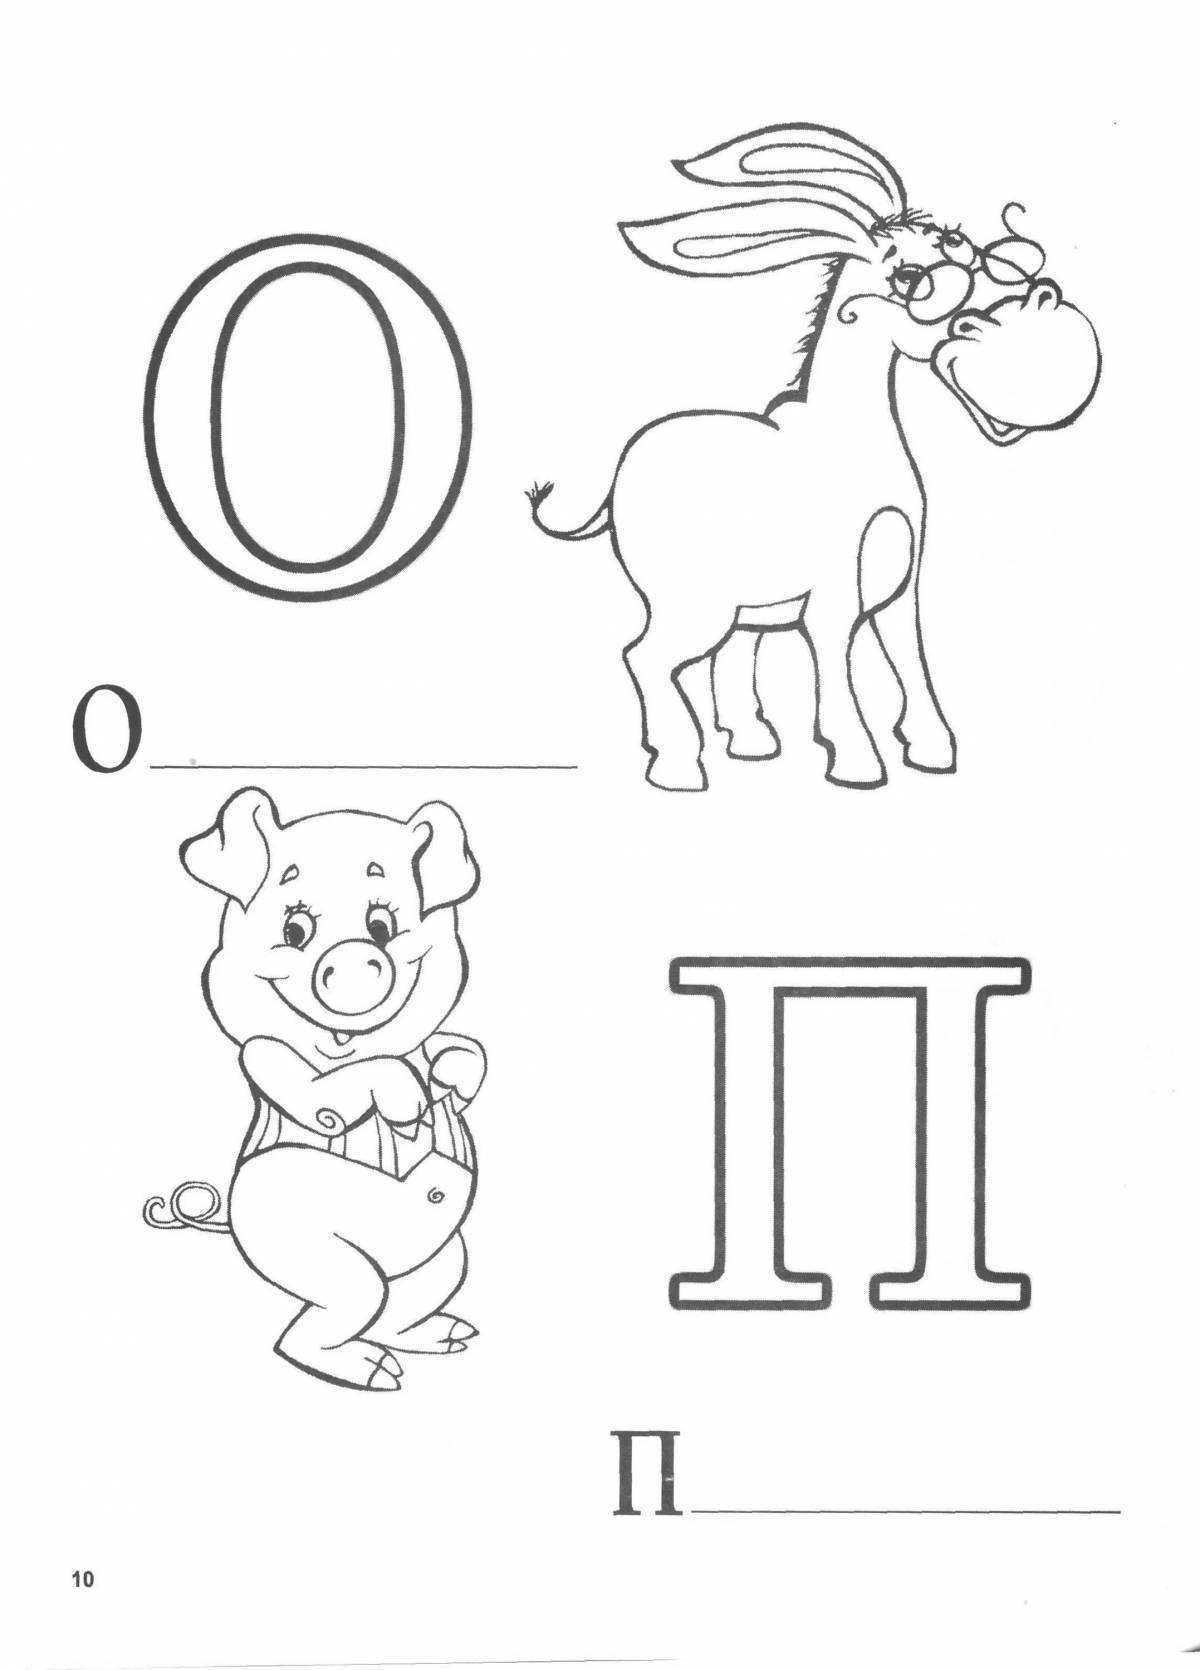 Fun letter coloring for kids